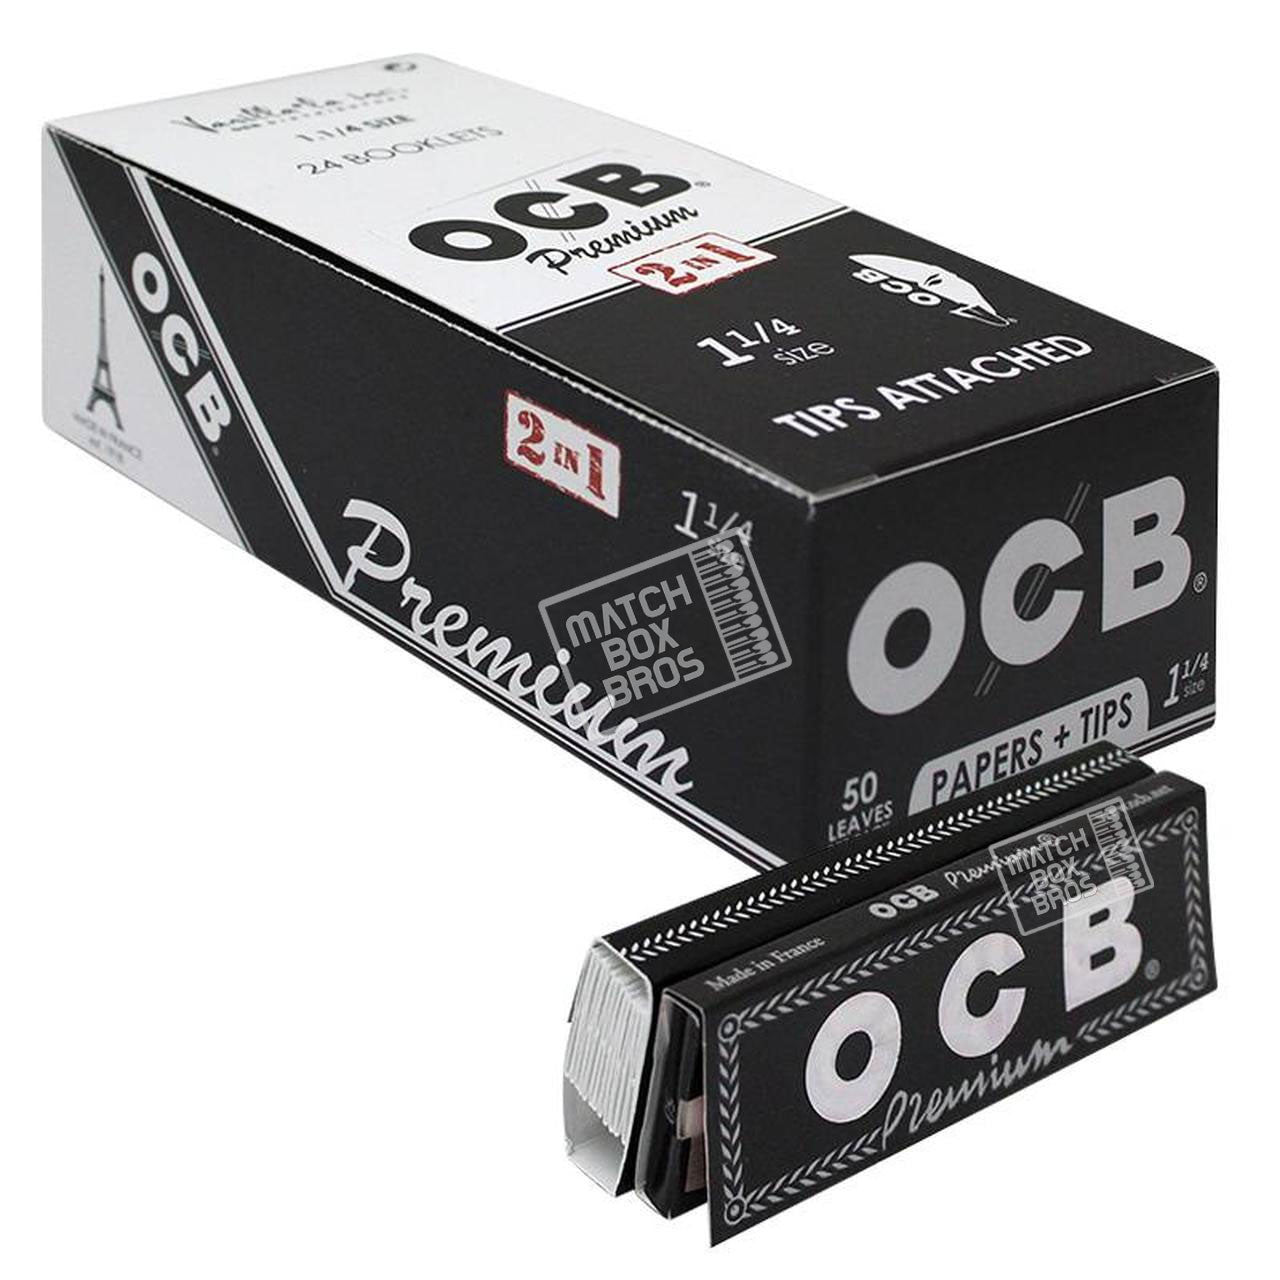  1 box OCB Perforated FILTER TIPS 25 booklets x 50